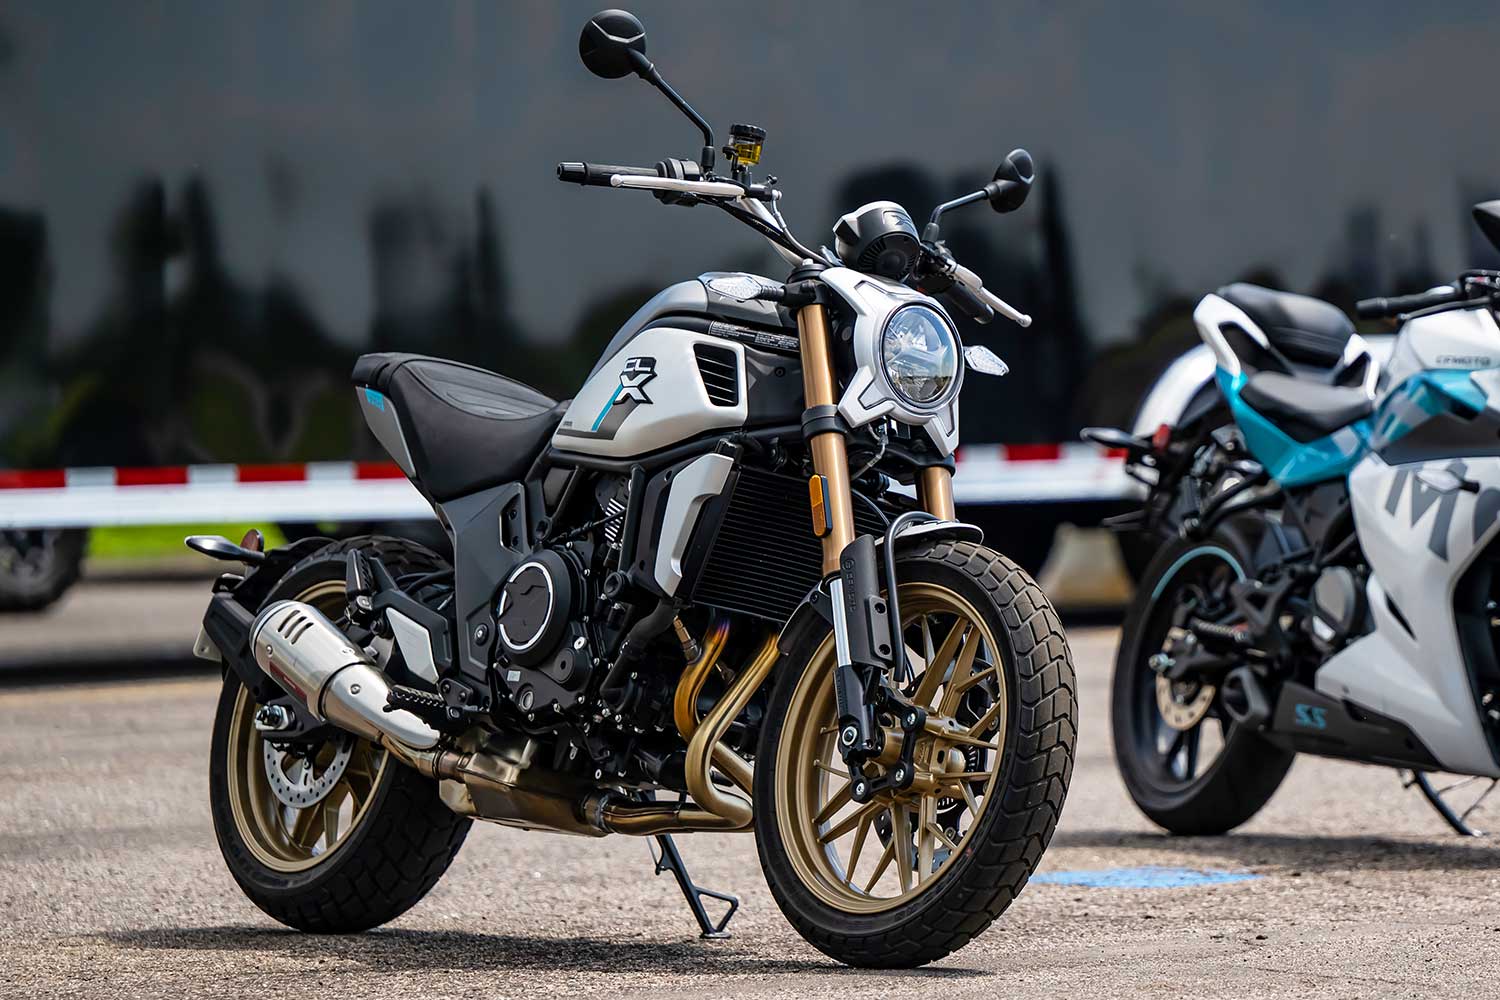 22 Cfmoto Motorcycle Lineup First Ride Review Rider Magazine